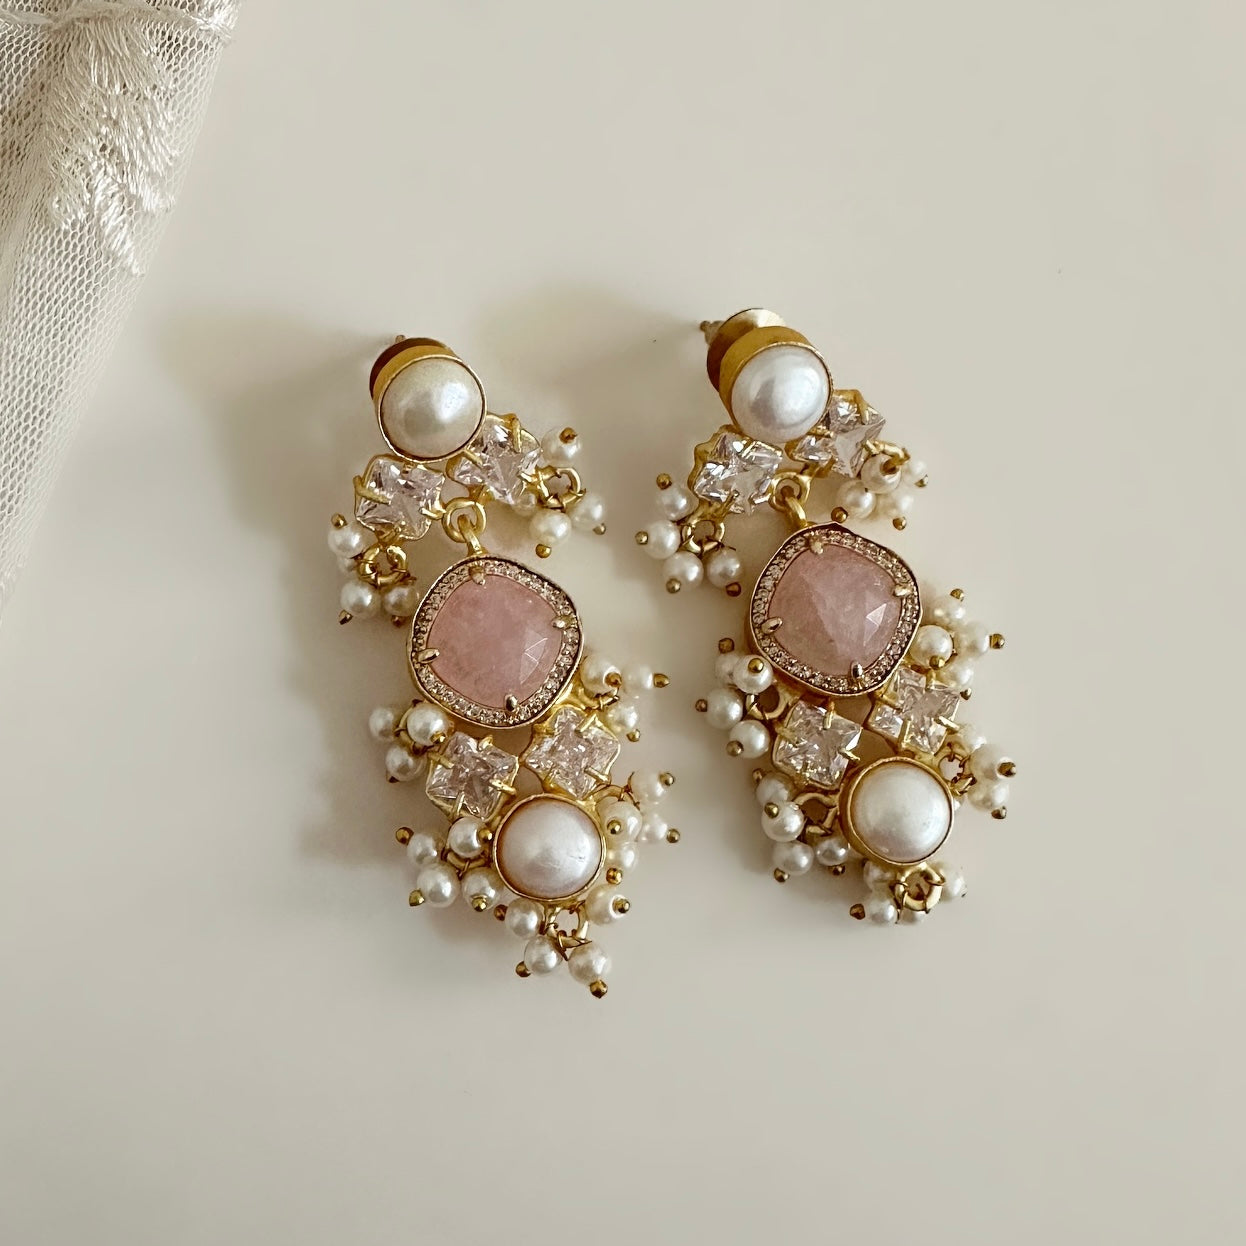 Enchanting and elegant, these Sana Earrings exude luxury. Crafted with a rose quartz centerpiece and pearl accents, they feature dazzling CZ crystals that will sparkle in any light. An ideal accessory for special occasions, this timeless design is sure to add a hint of sophistication to any ensemble. Earring drop: 6cm